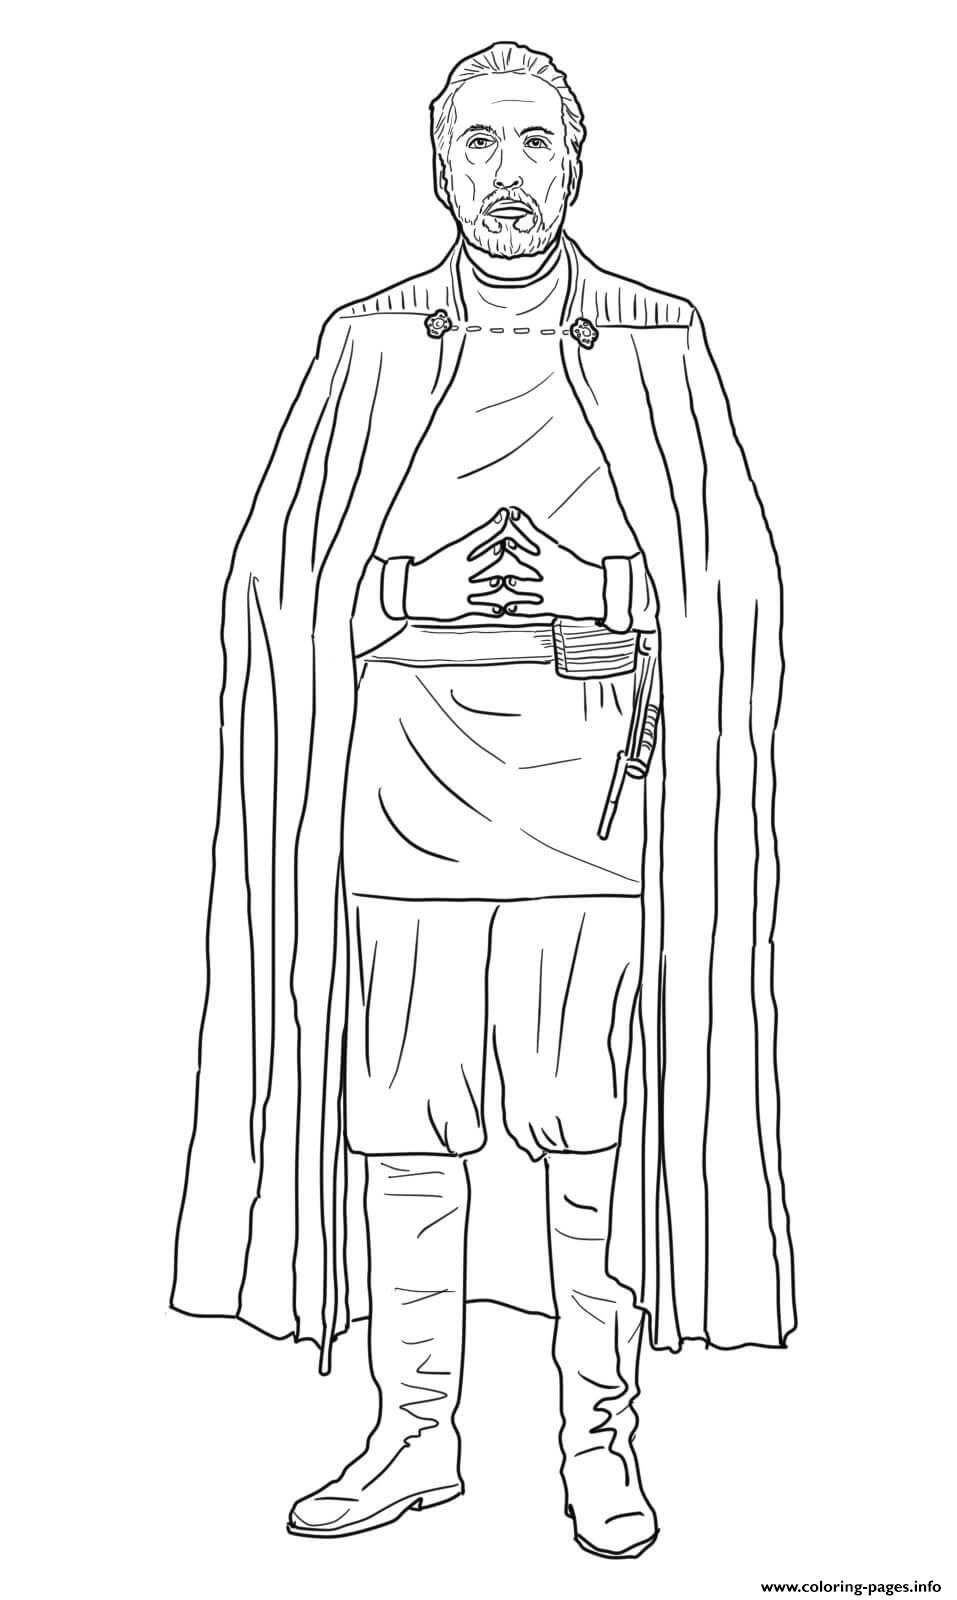 Count Dooku Star Wars Episode II Attack Of The Clones Coloring Pages